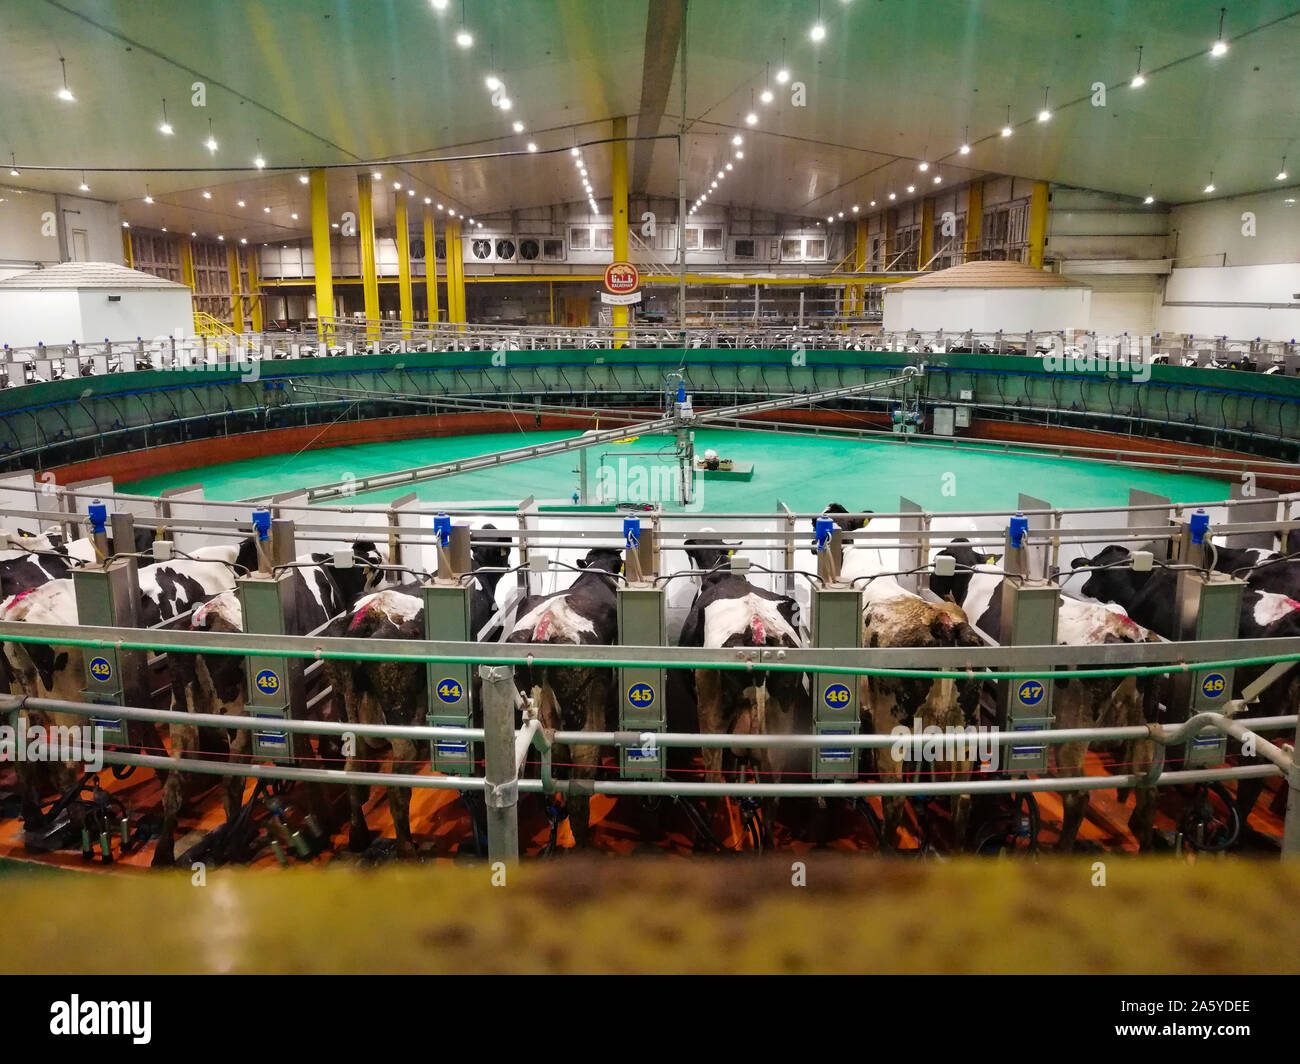 Doha, Qatar: Baladna Milk production farm cows on line to provide milk. Automatic milking system / Robotic milking rotary system for dairy industry. Stock Photo